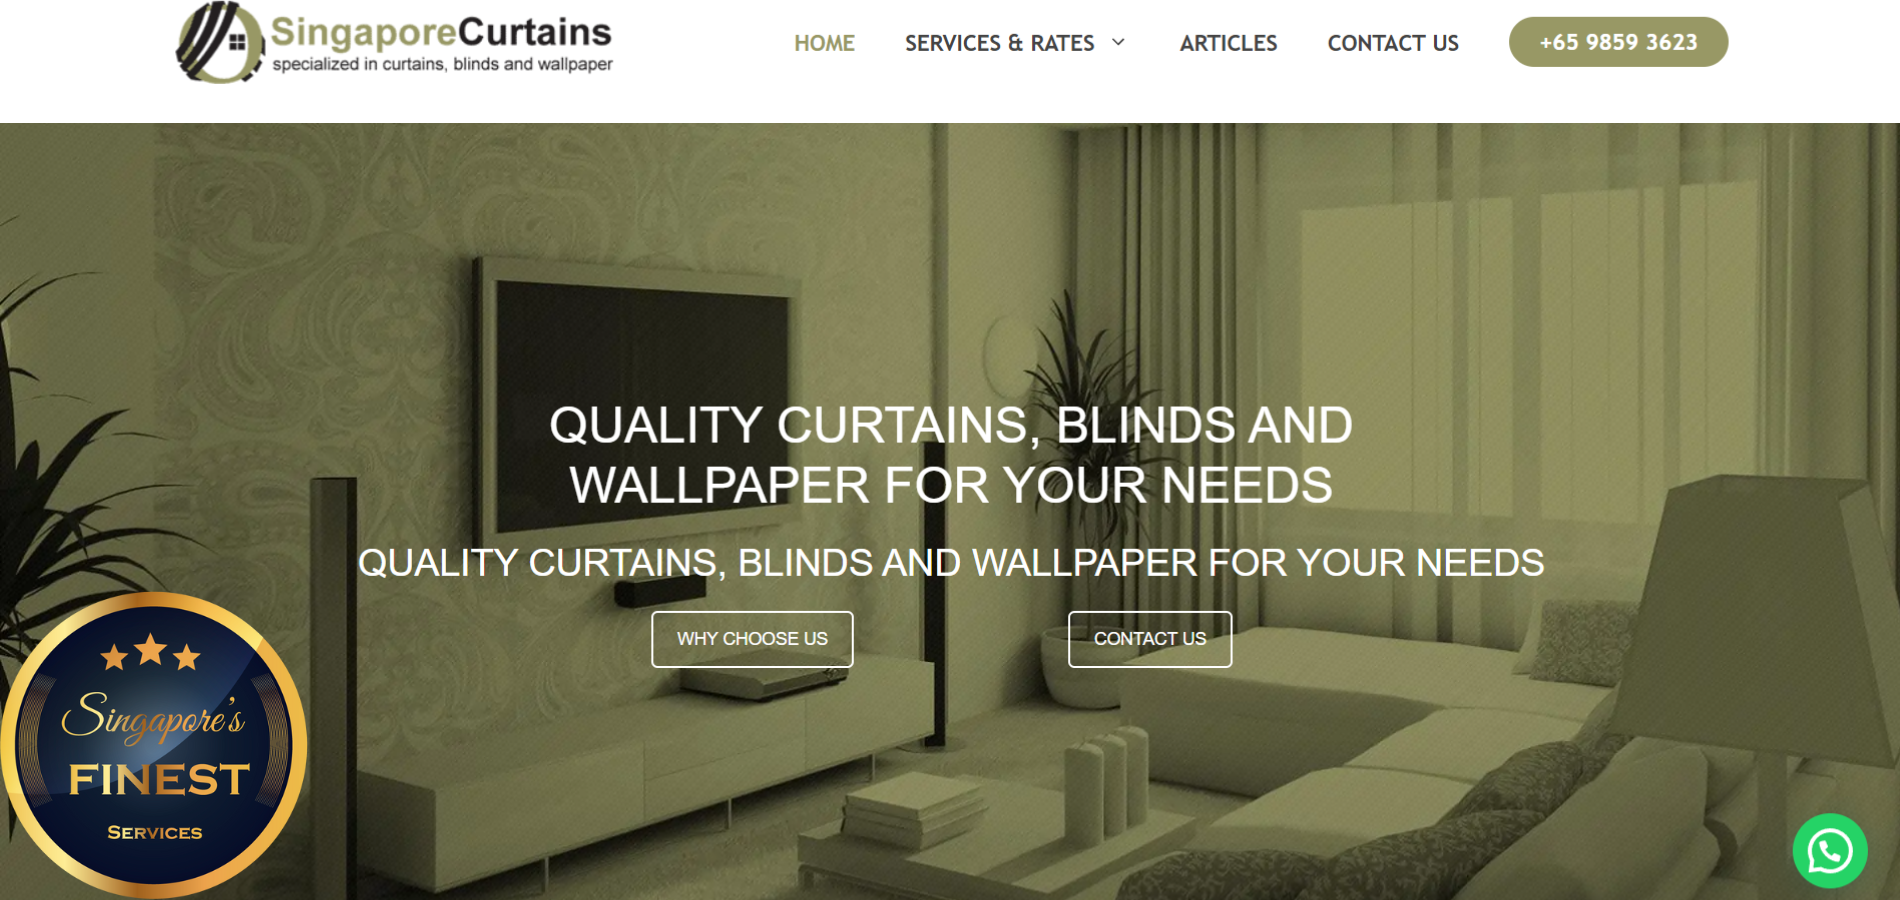 The Finest Curtain Installer in Singapore